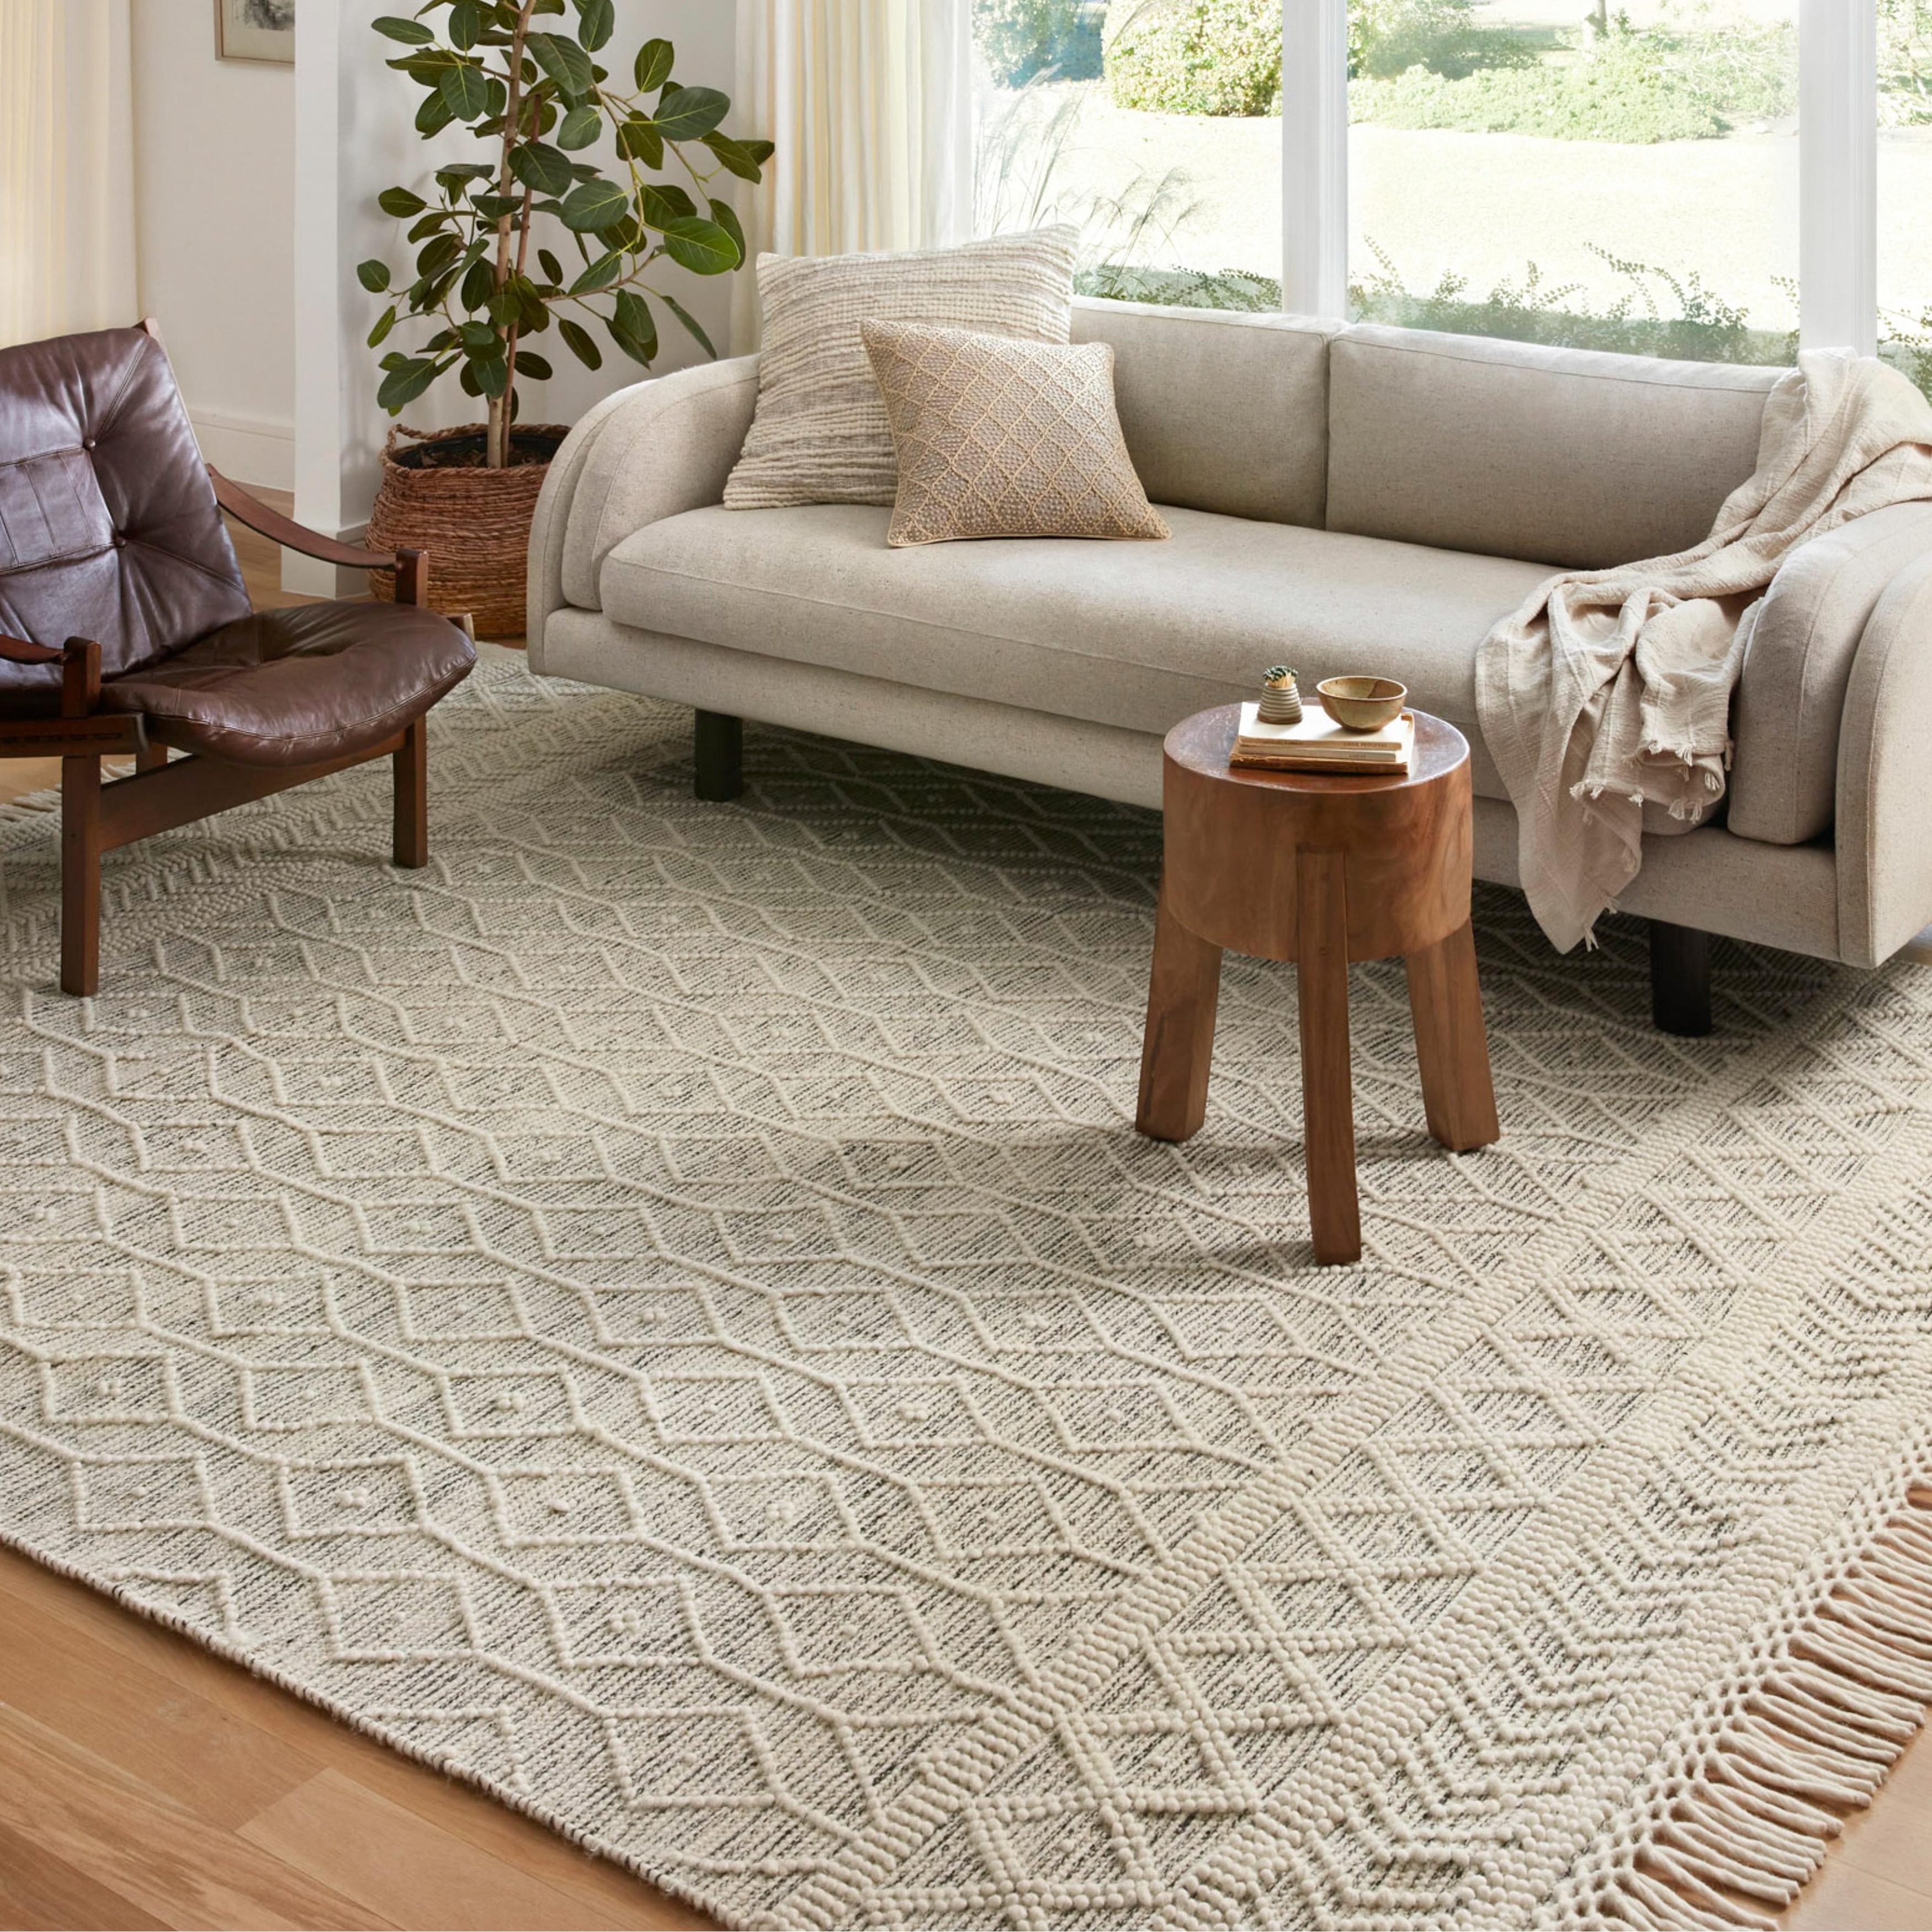 https://ak1.ostkcdn.com/images/products/is/images/direct/d4ce33607a3cd0e173c1fce0006f2b3130f3f3a4/Alexander-Home-Joanna-Farmhouse-Hand-Woven-Area-Rug.jpg